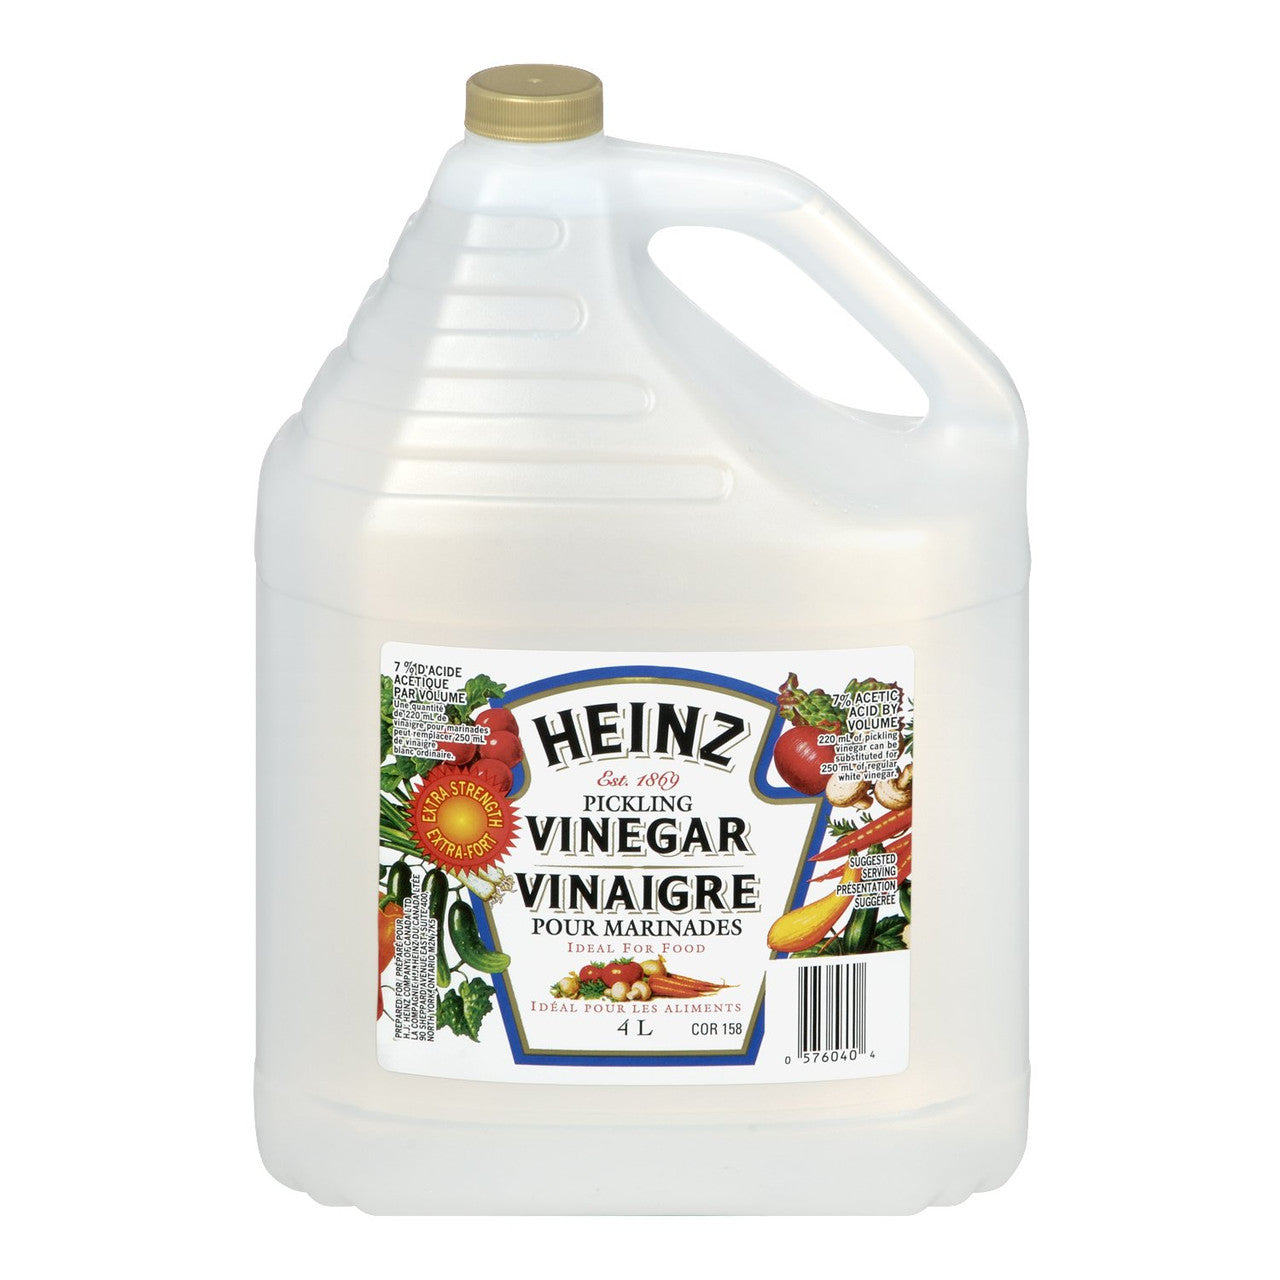 Heinz Pickling Vinegar, 4 Liters/1.06 Gallons, {Imported from Canada}